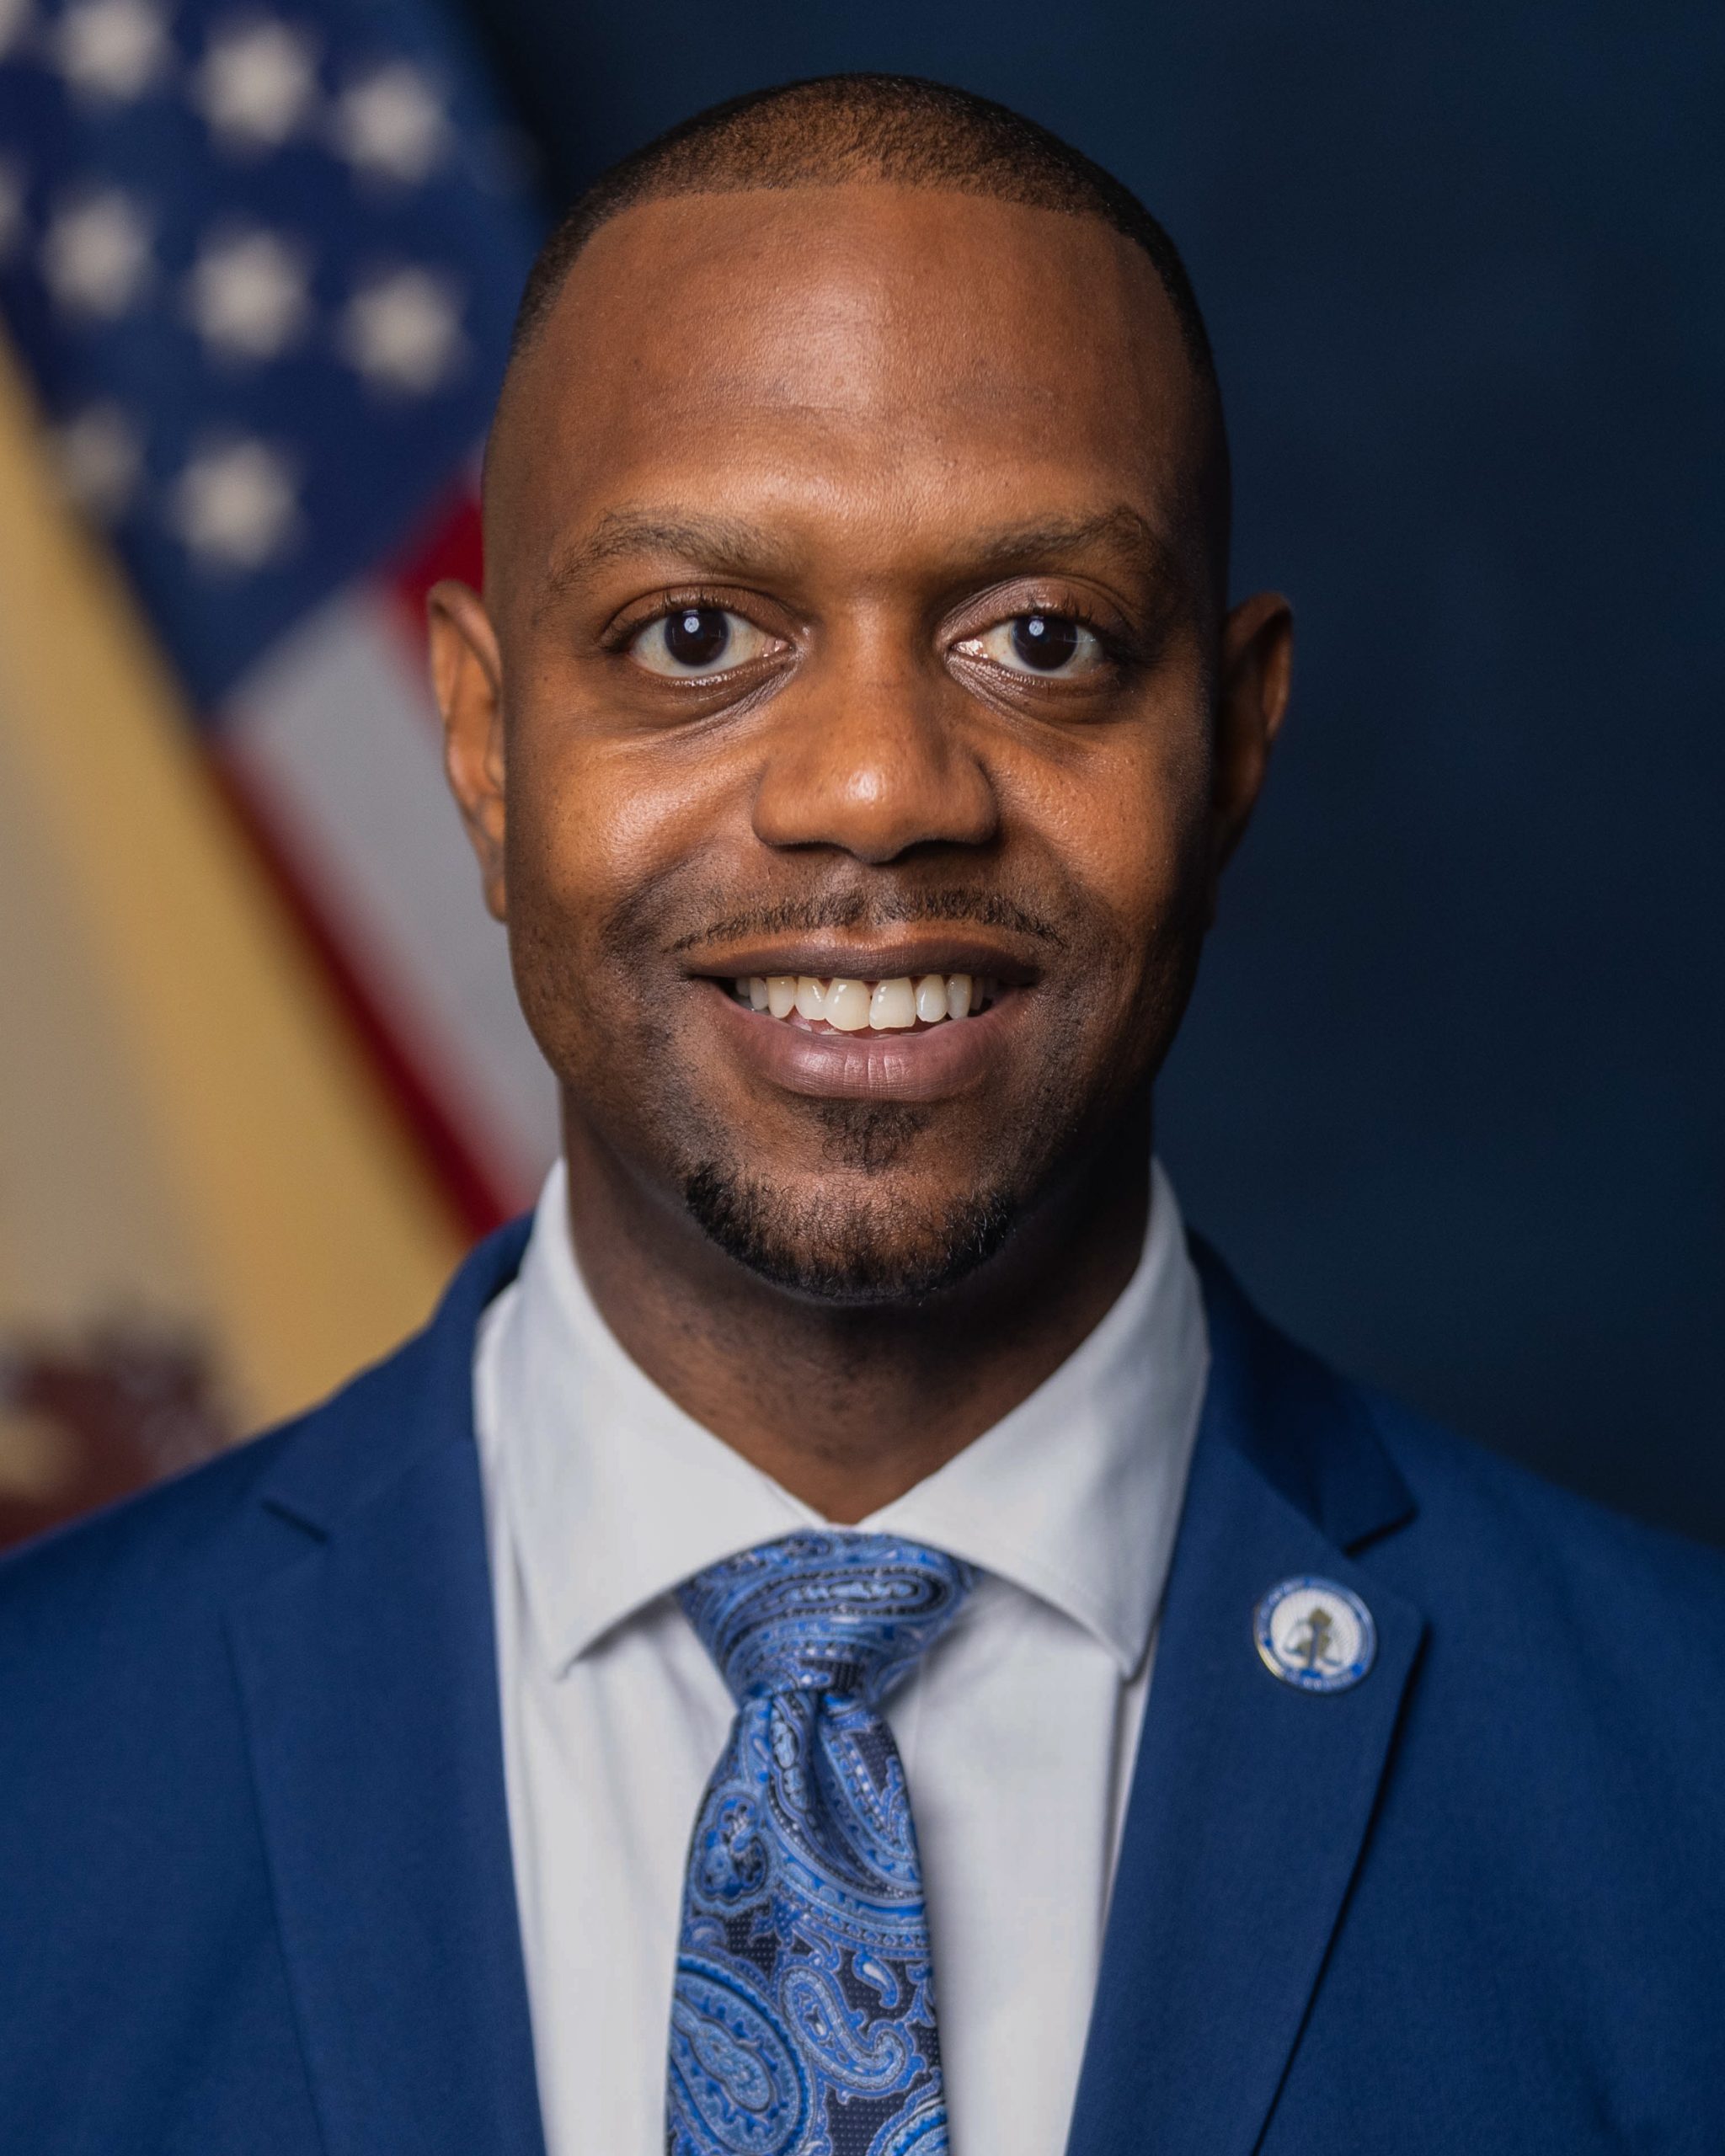 </p>
<h3 style="color:white;">Raymond Royster</h3>
<h5 style="color:white;font-style:italic;">Deputy Director of Community Engagement</h5>
<p>